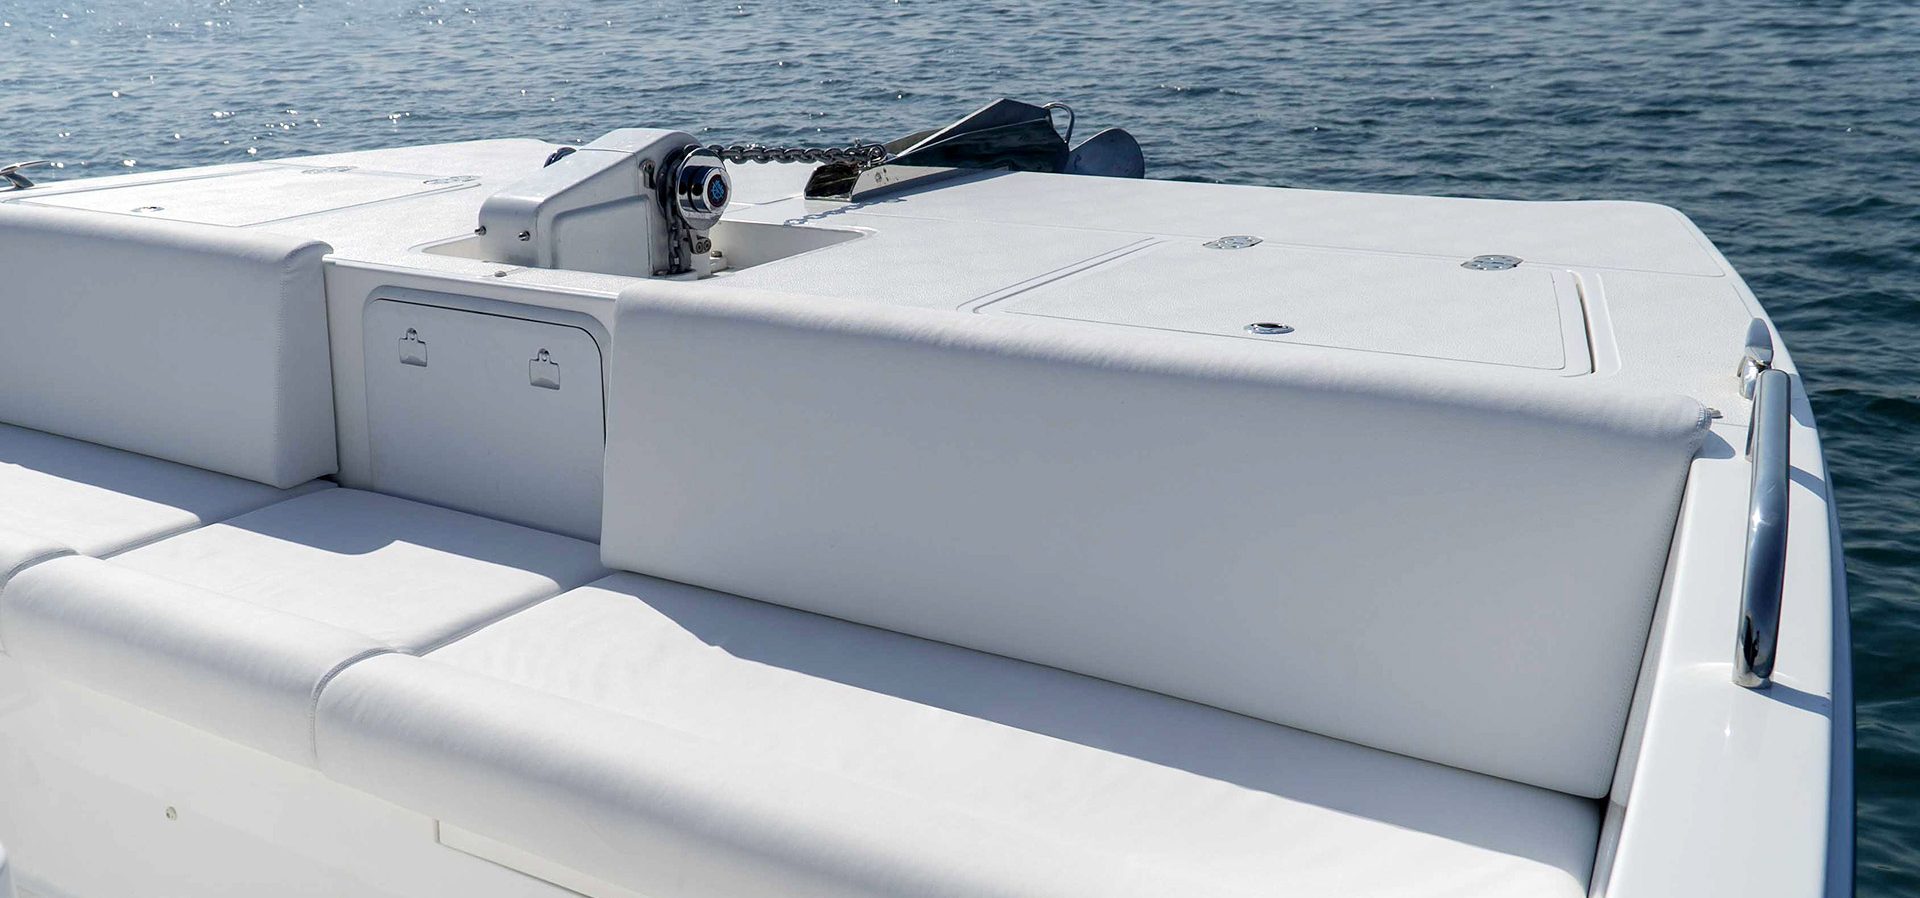 SilverCat 40 LUX - Bow Seating Area